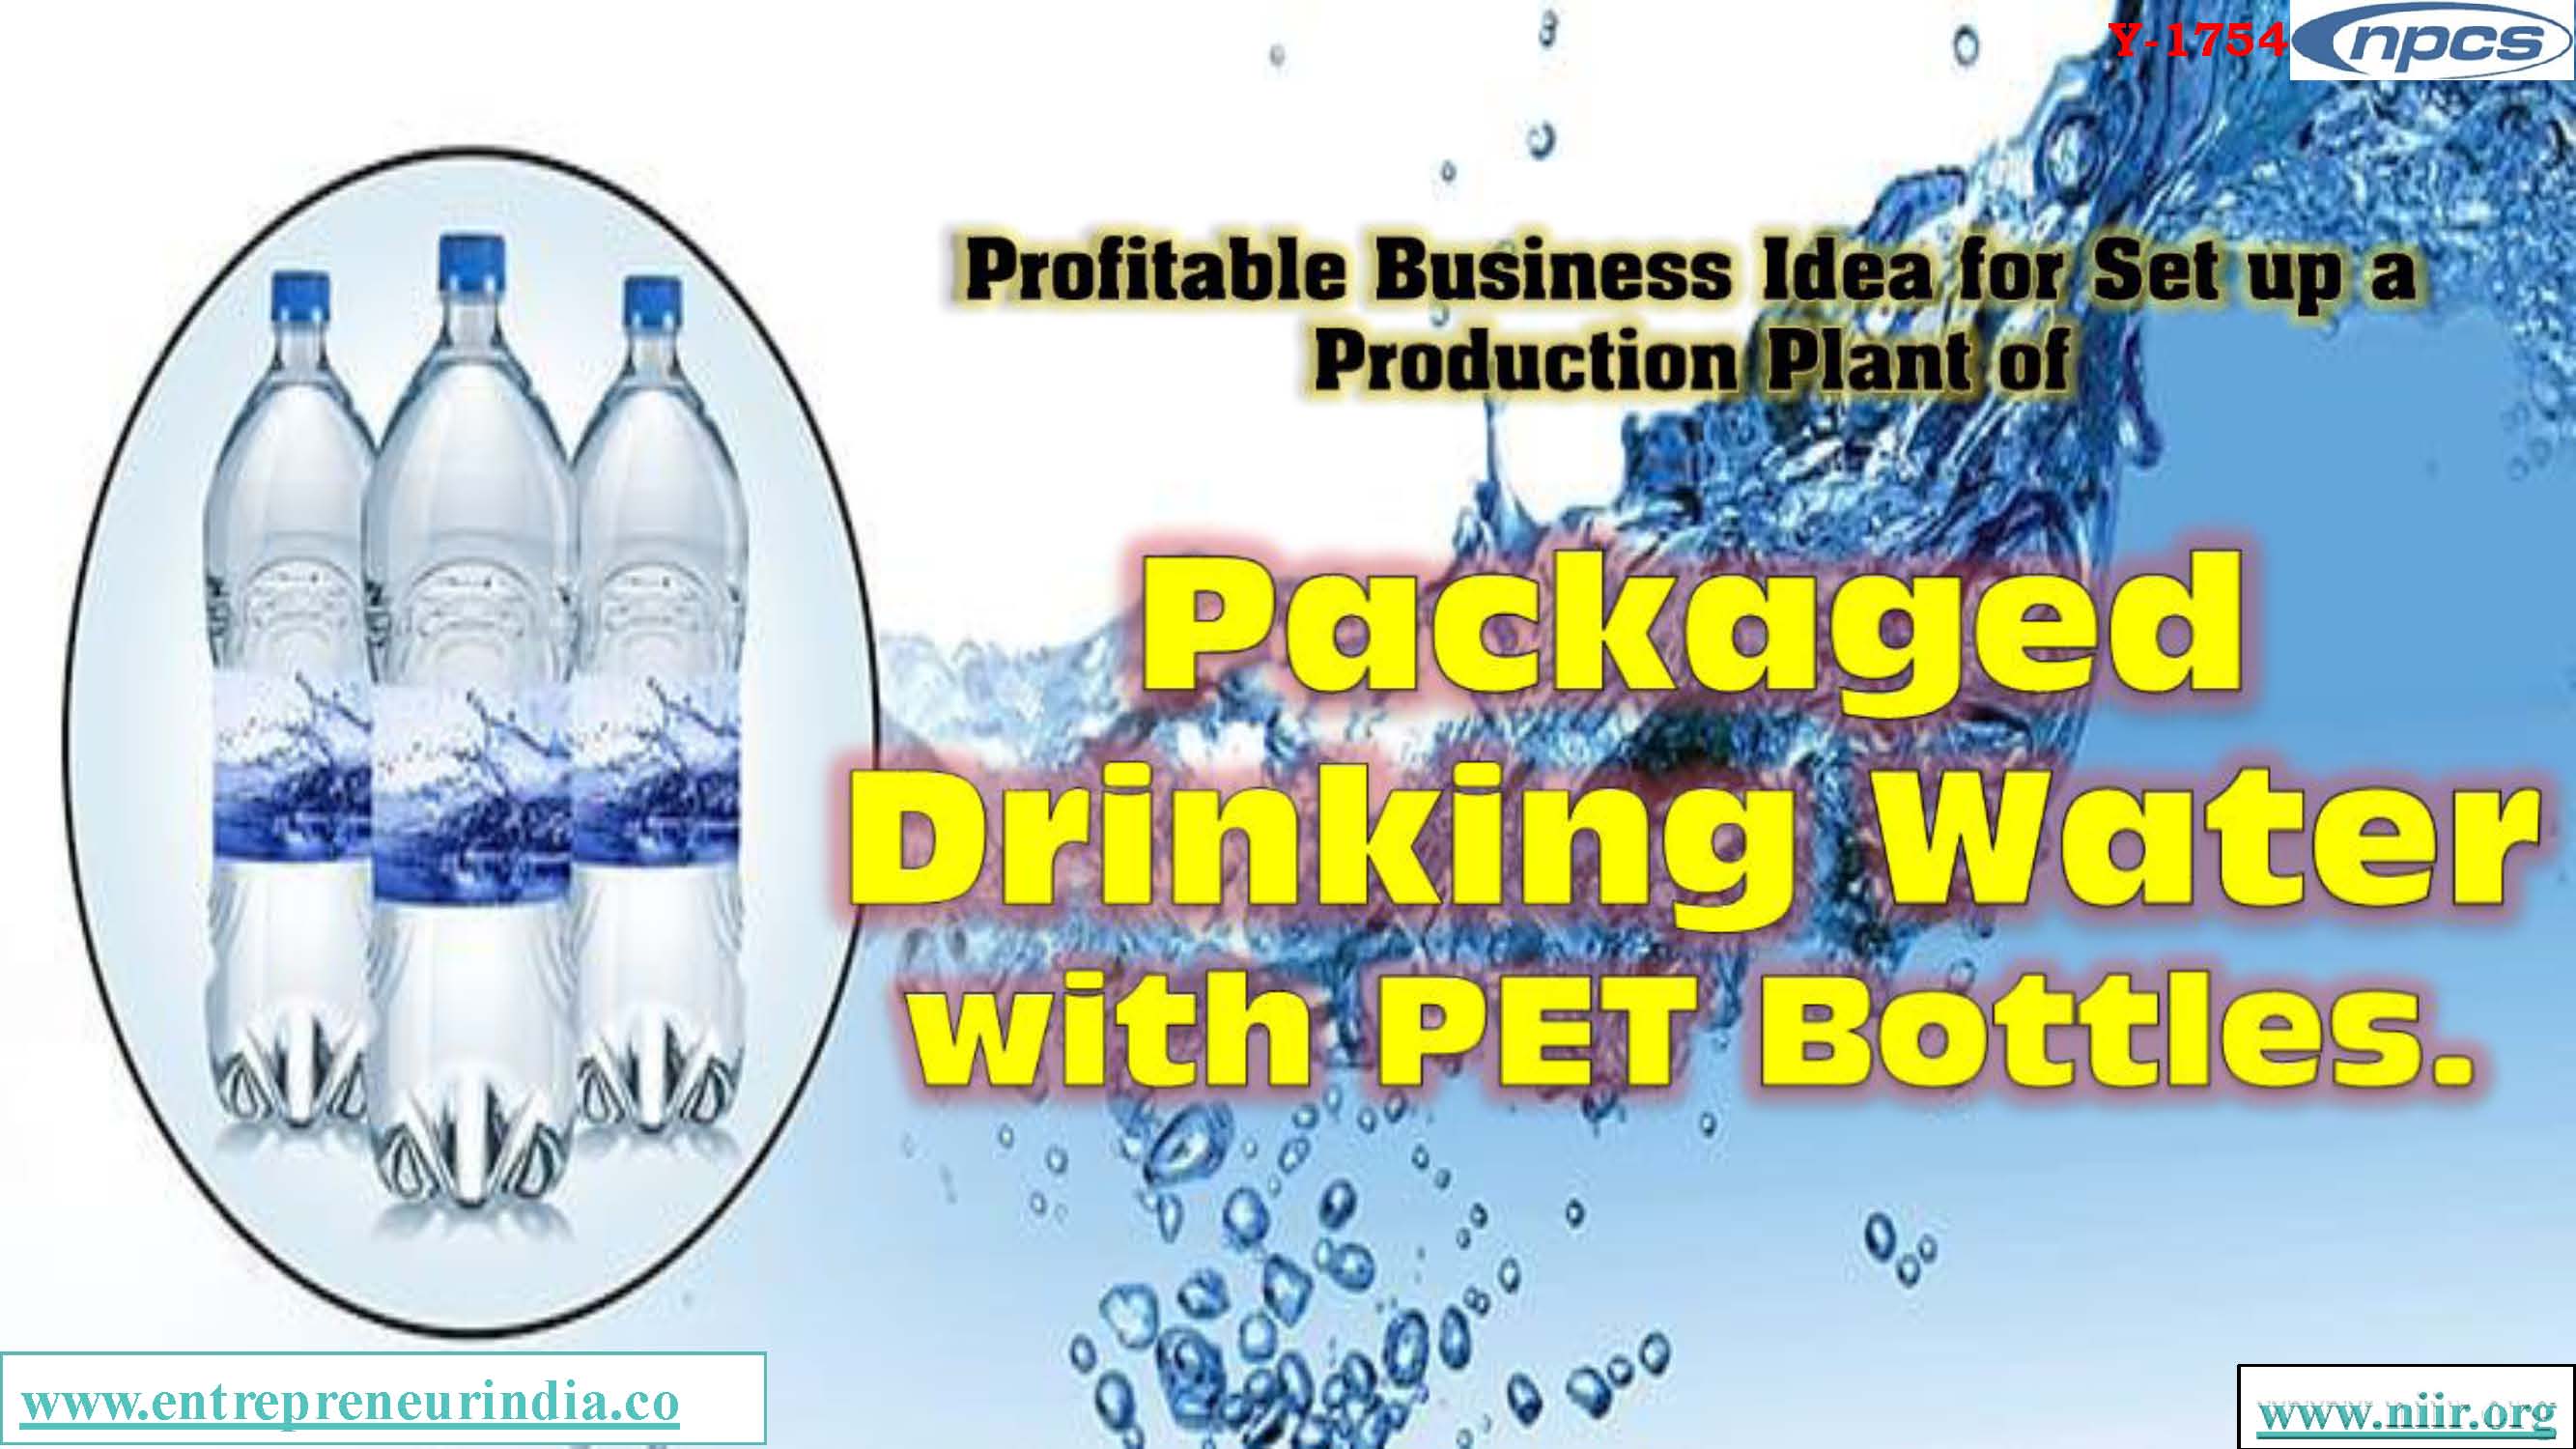 Profitable Business Idea for Set up a Production Plant of Packaged Drinking Water with PET Bottles